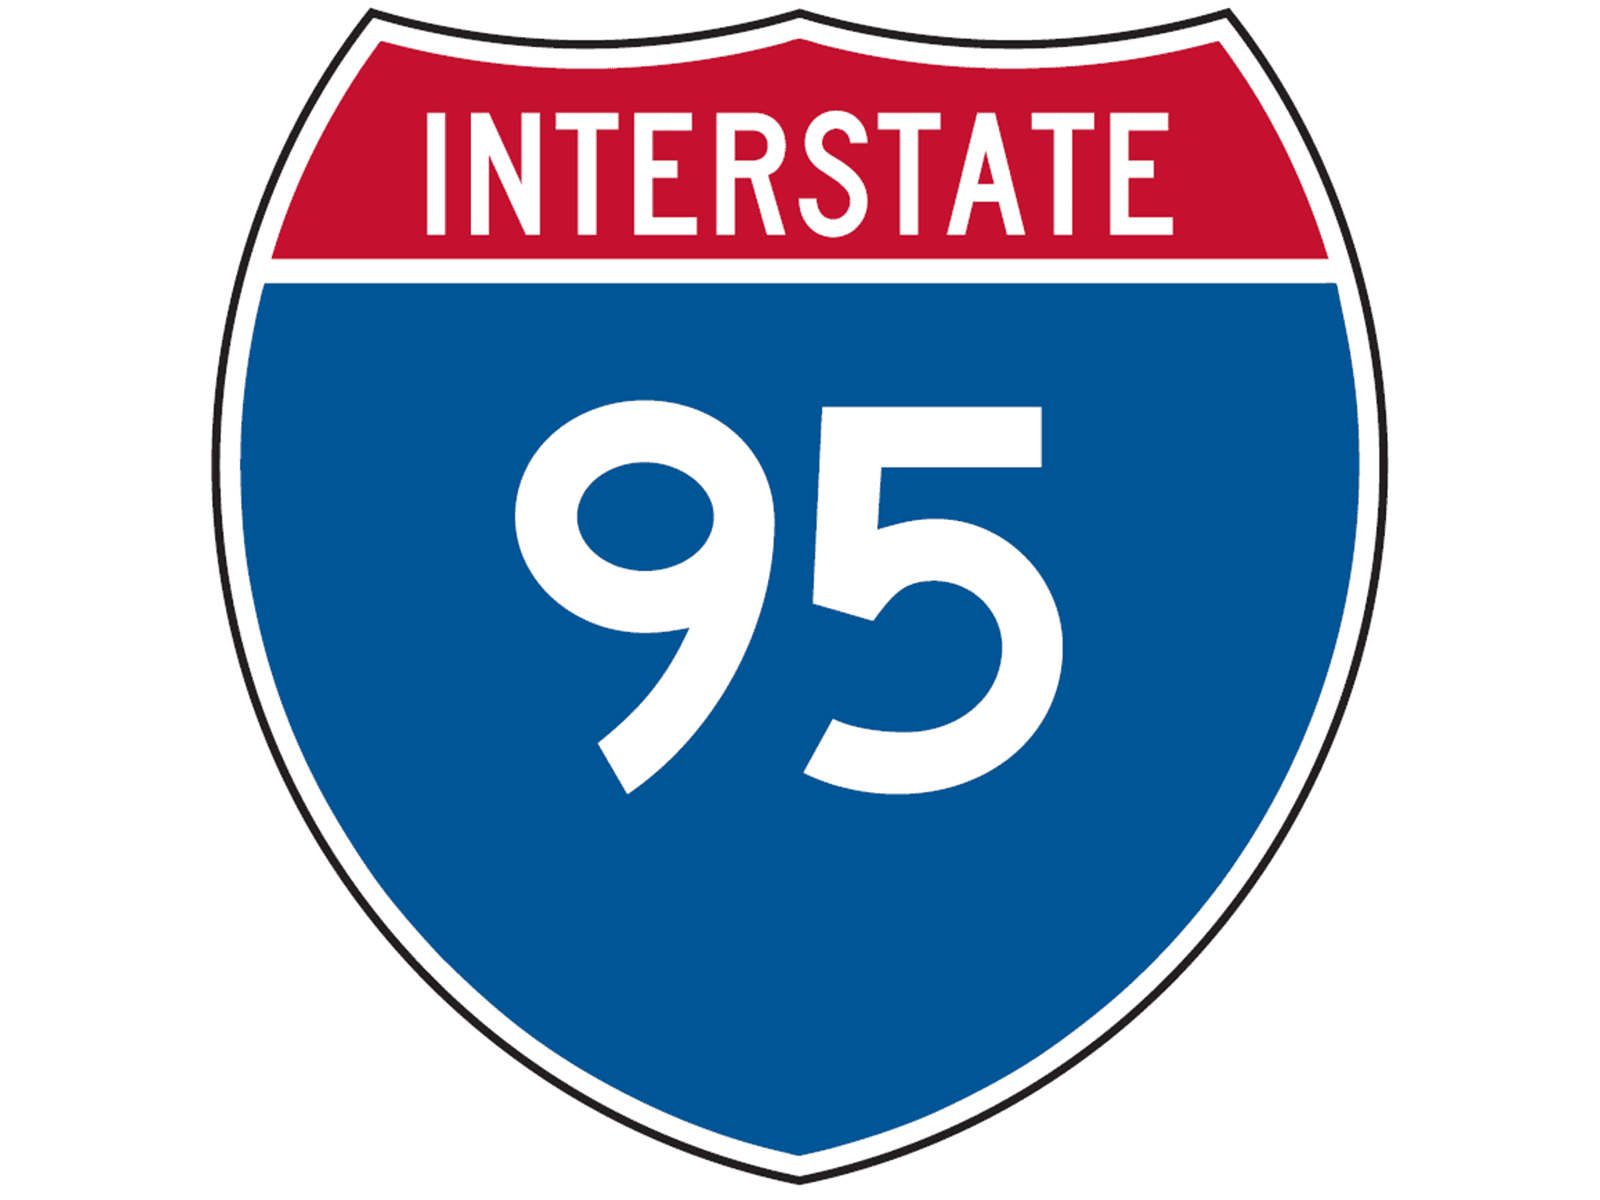 Interstate Route M1-1-95 - Guide Signs: Route Signs